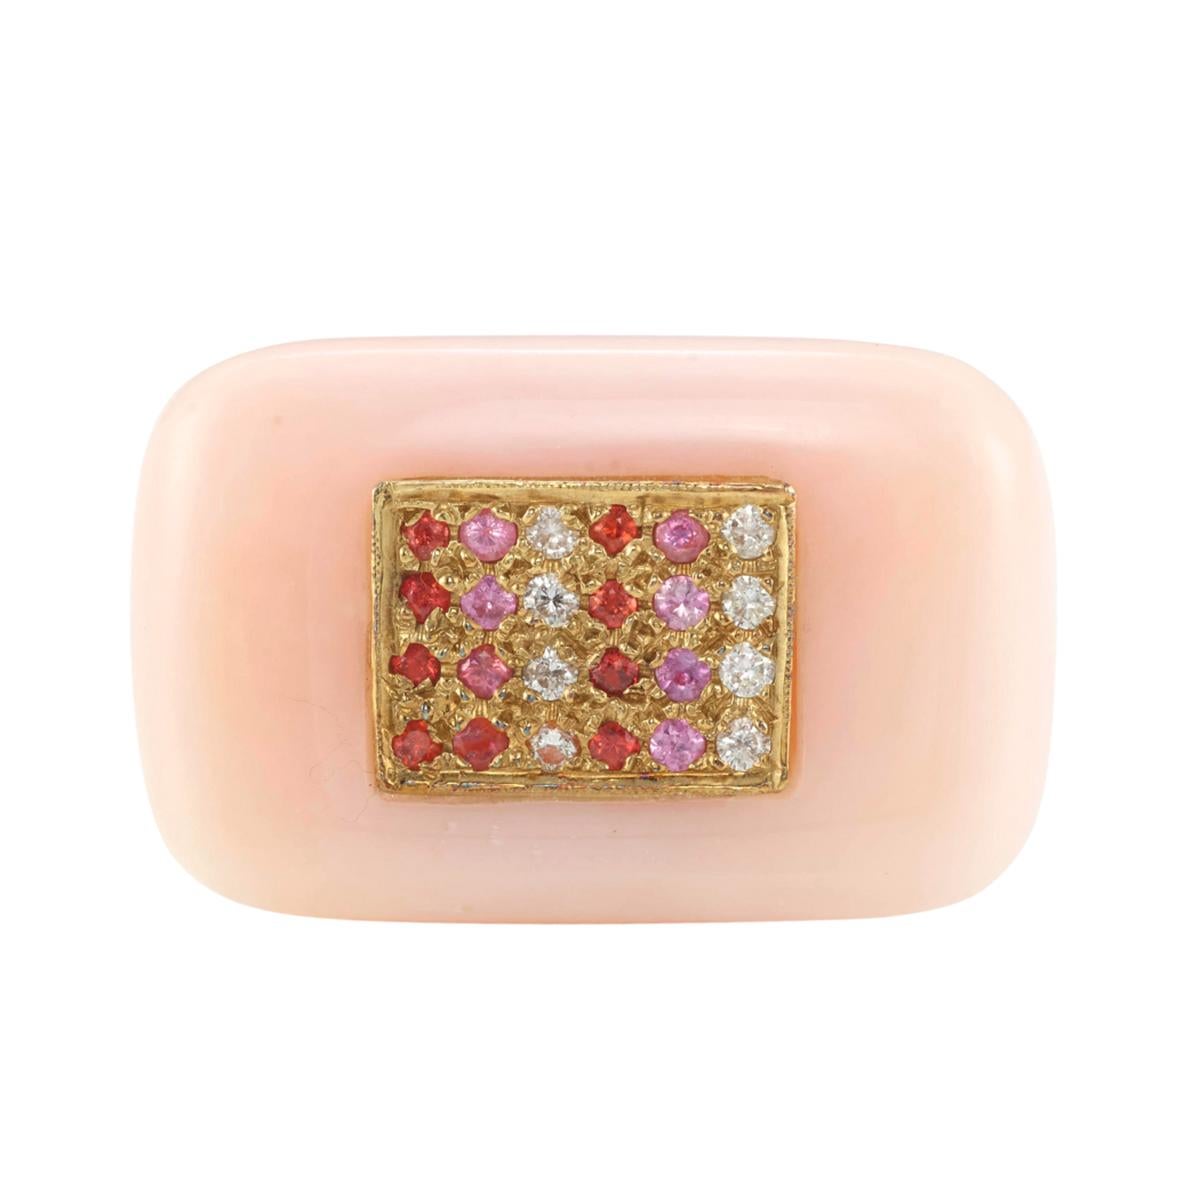 Pretty in Pink!

This pink and rose-hued ring sparkles with diamond accents to create and fun cupcake-inspired jewel. Set in 18k yellow gold and pink opal and signed by Kara Ross.

Width is 1-7/5 inches
Approximate weight is 27 grams
Brilliant-cut